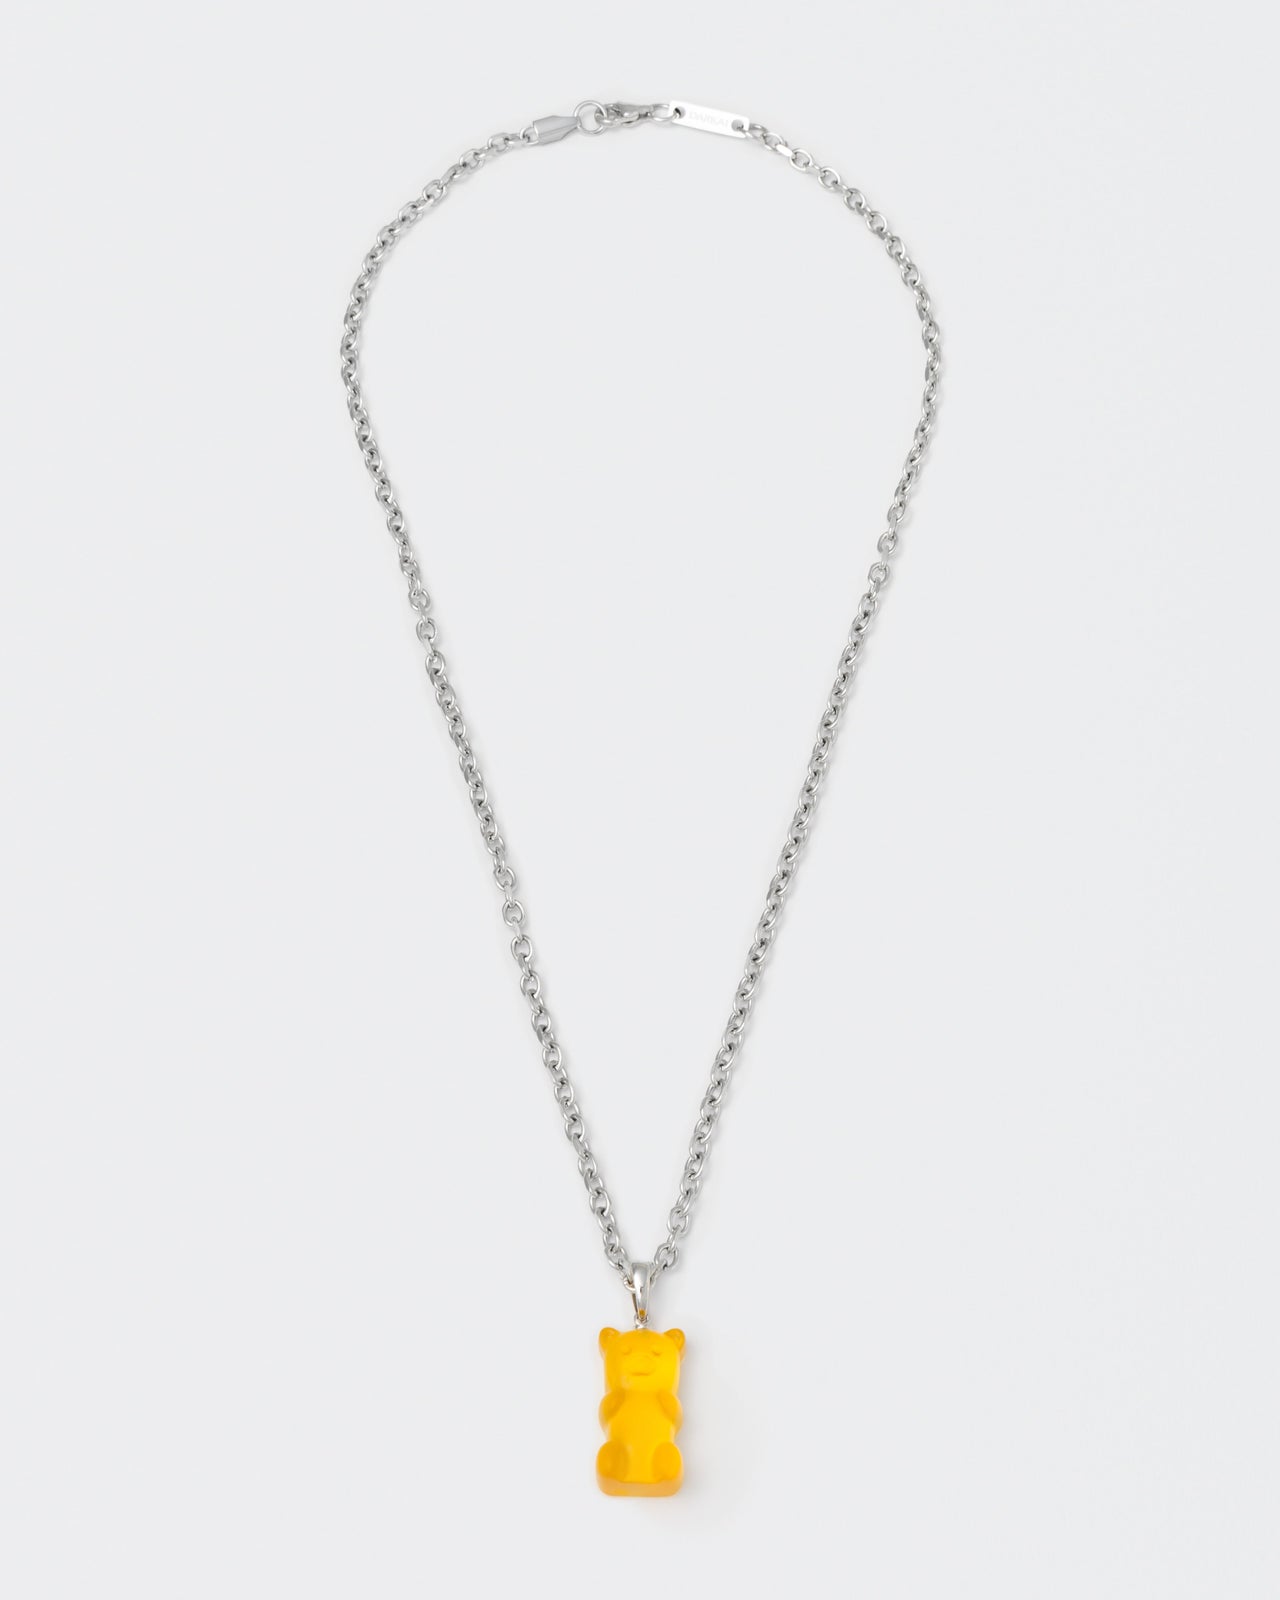 18k white gold coated gummy bear pendant necklace with 3D cut sandblasted crystal in yellow and 3mm rolo chain